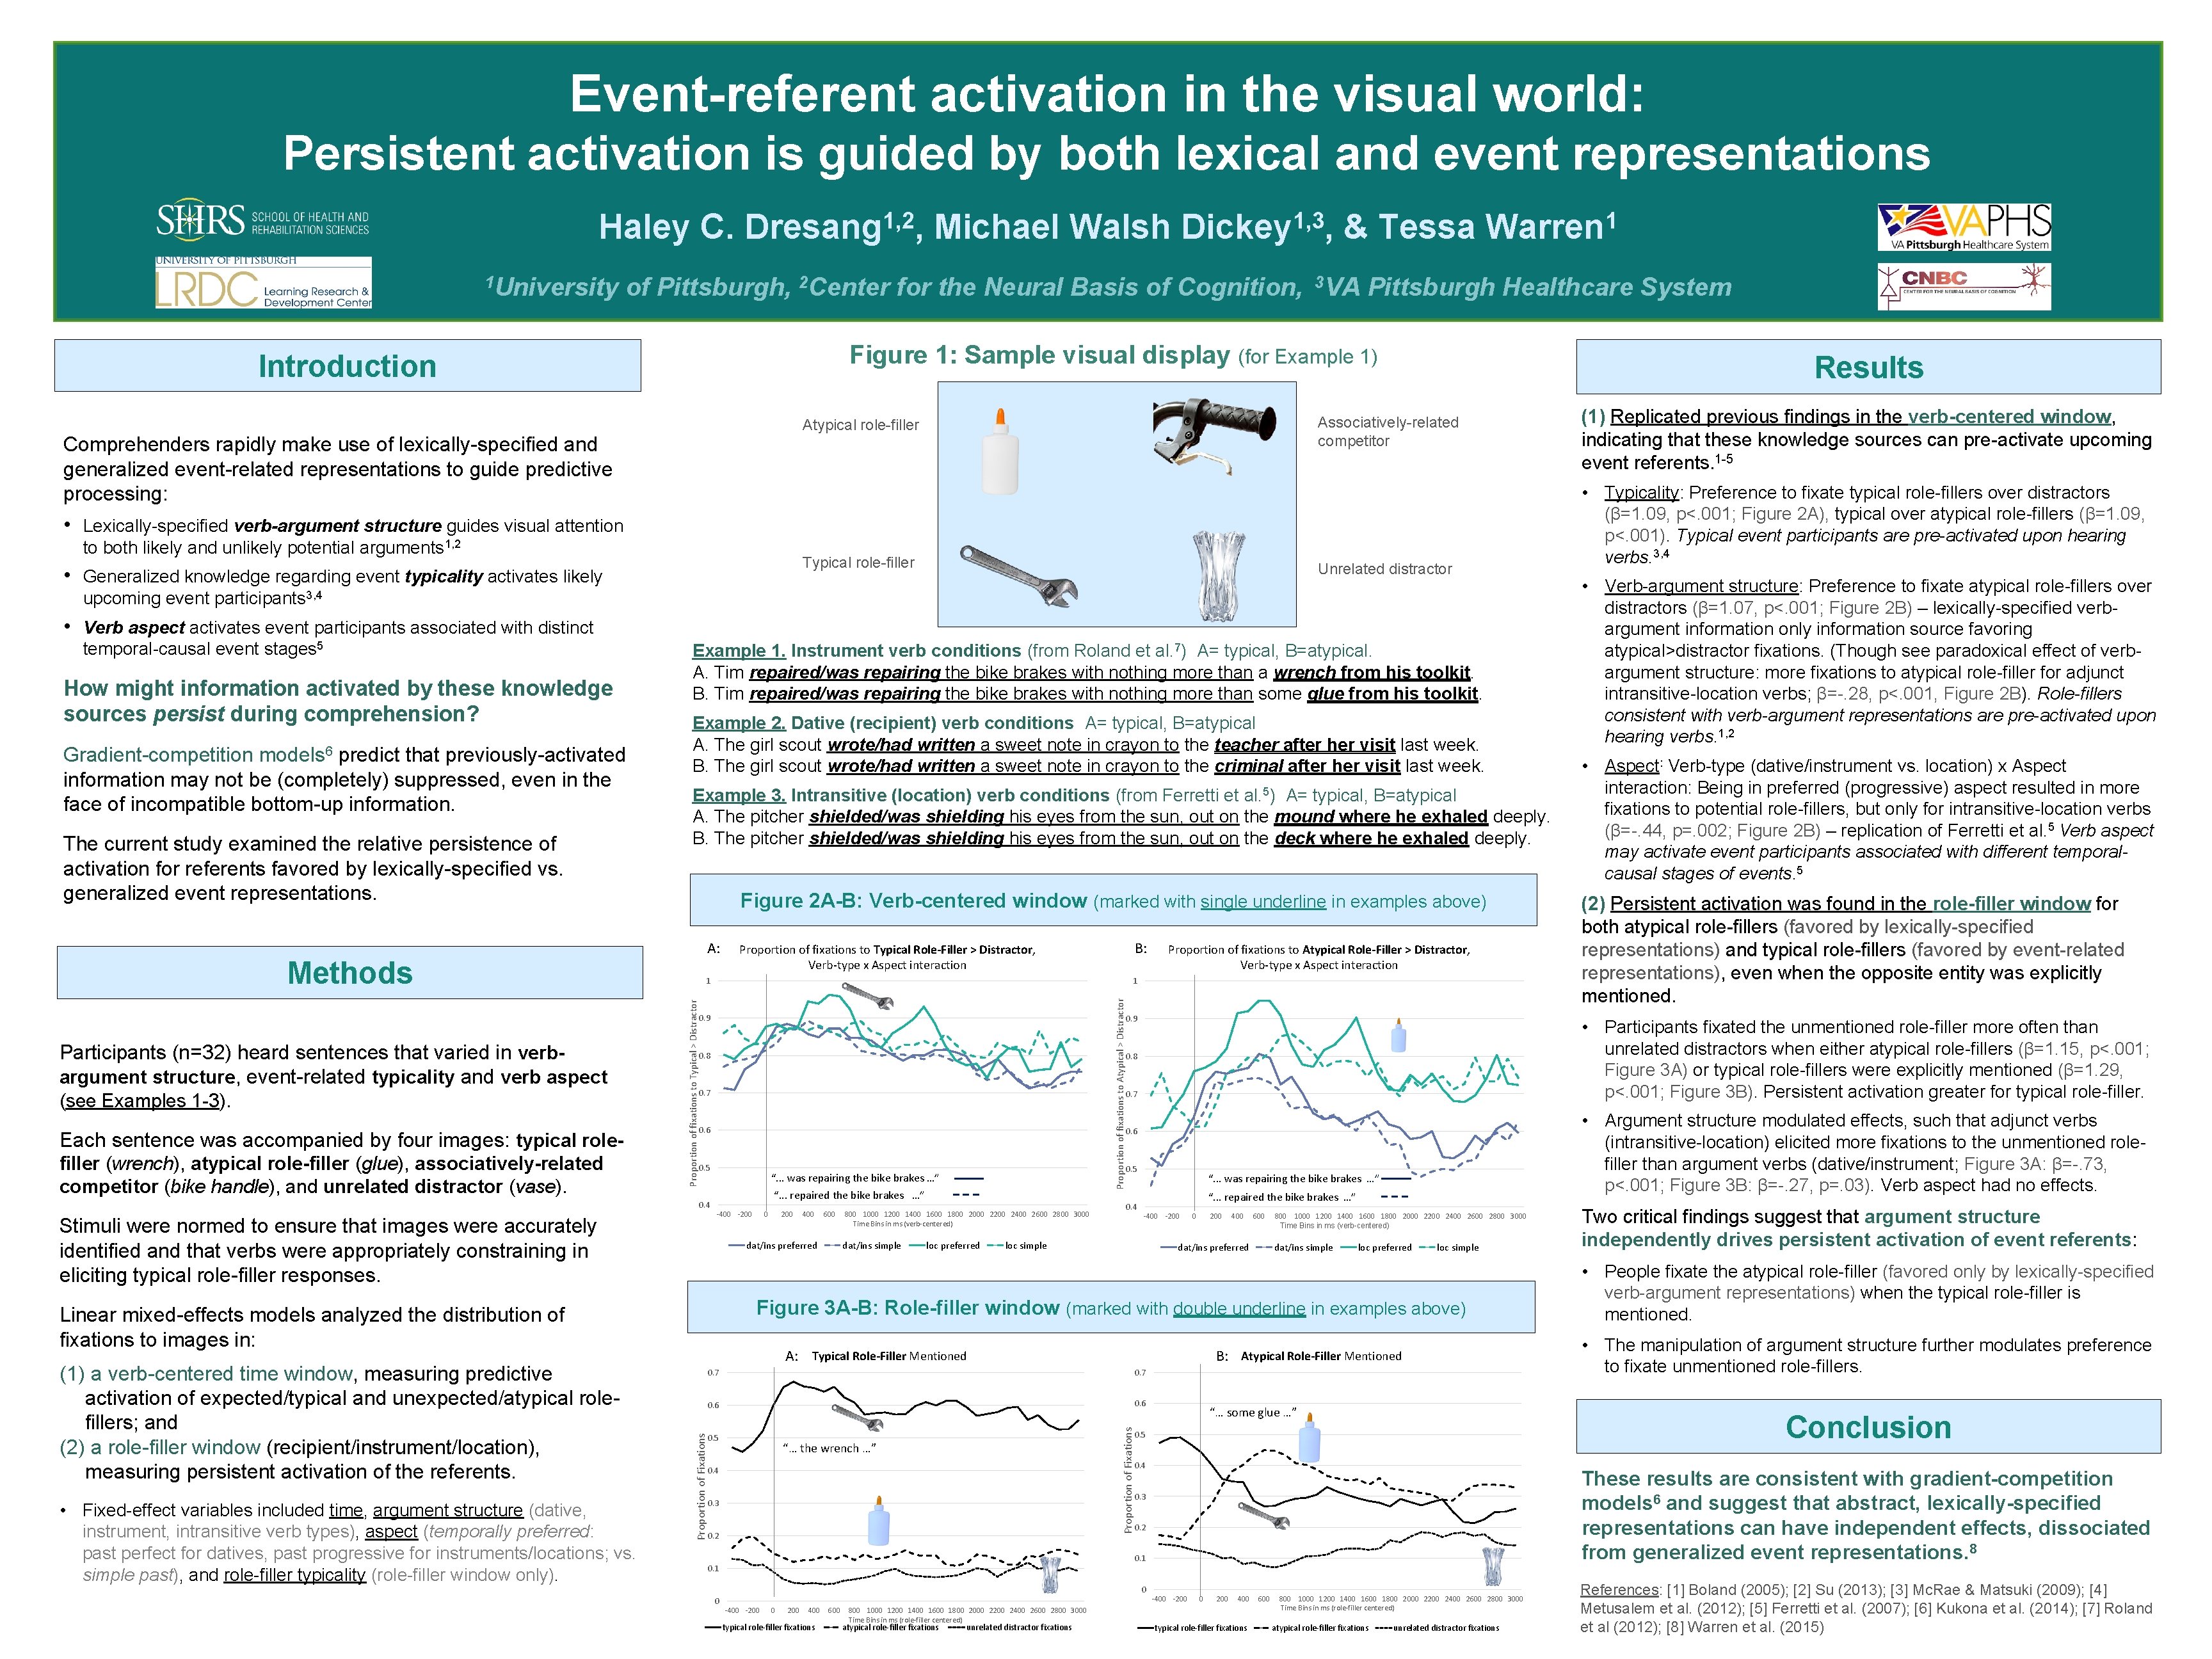 Event-referent activation in the visual world: Persistent activation is guided by both lexical and